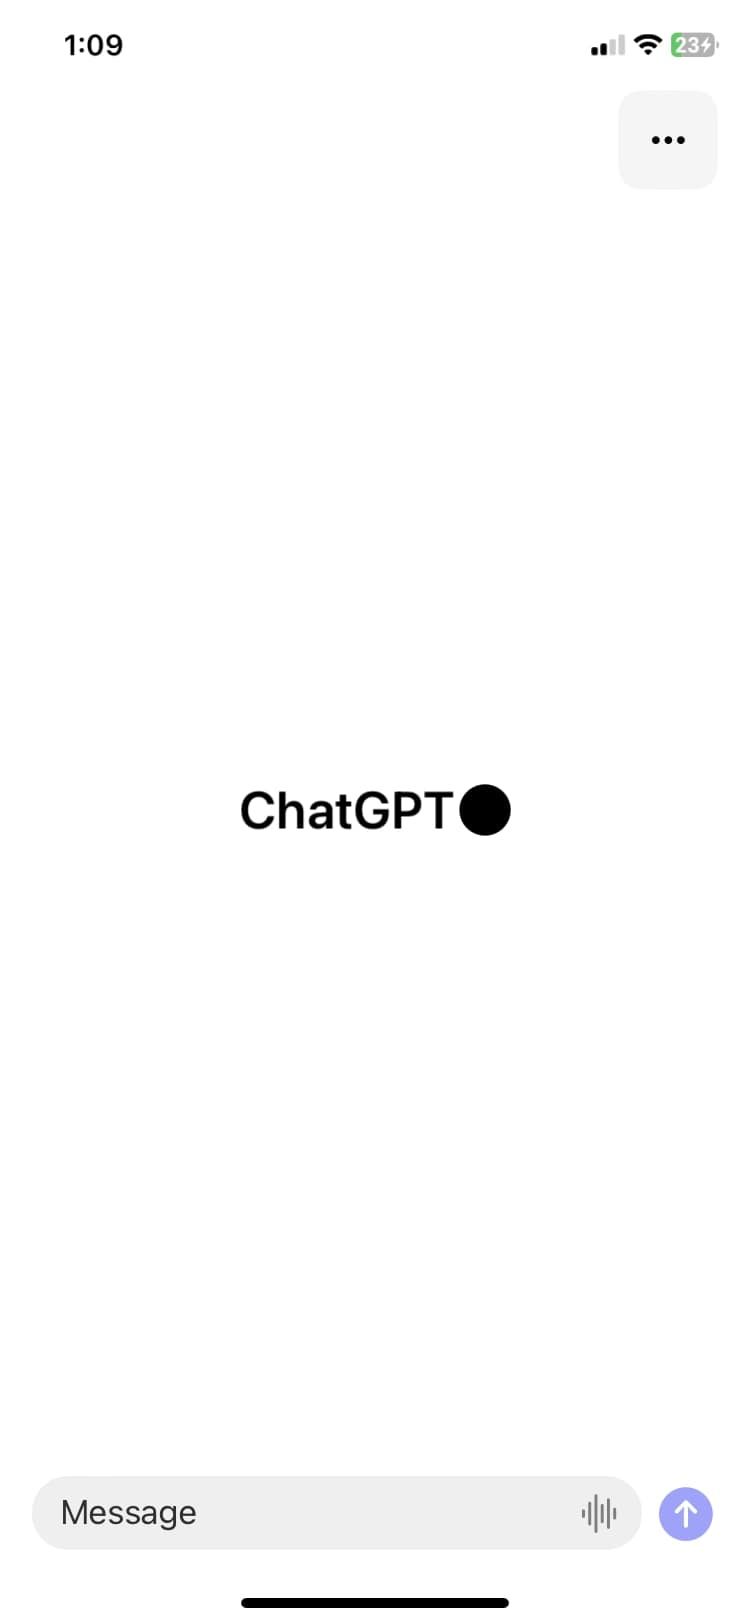 ChatGPT opening page on iOS app